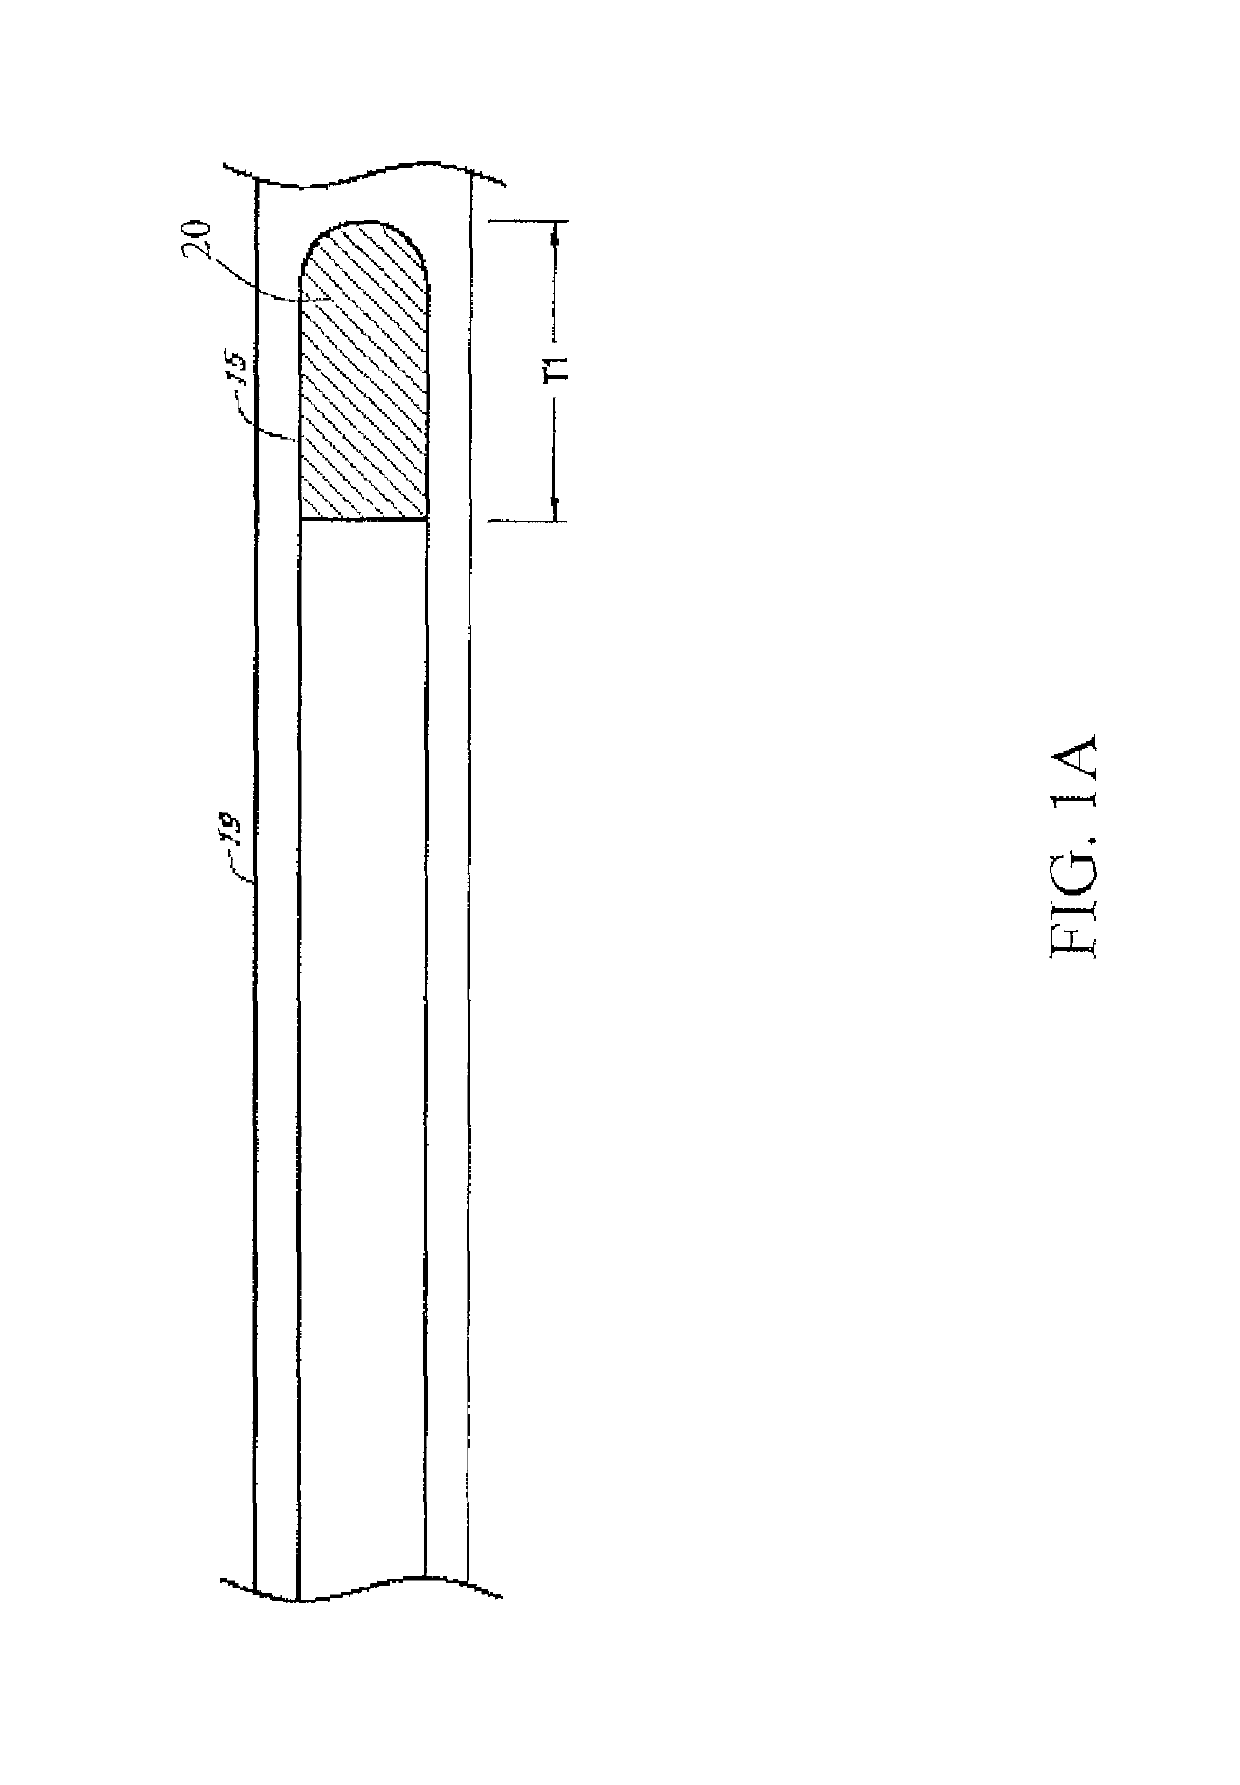 Electrosurgical medical device with power modulation